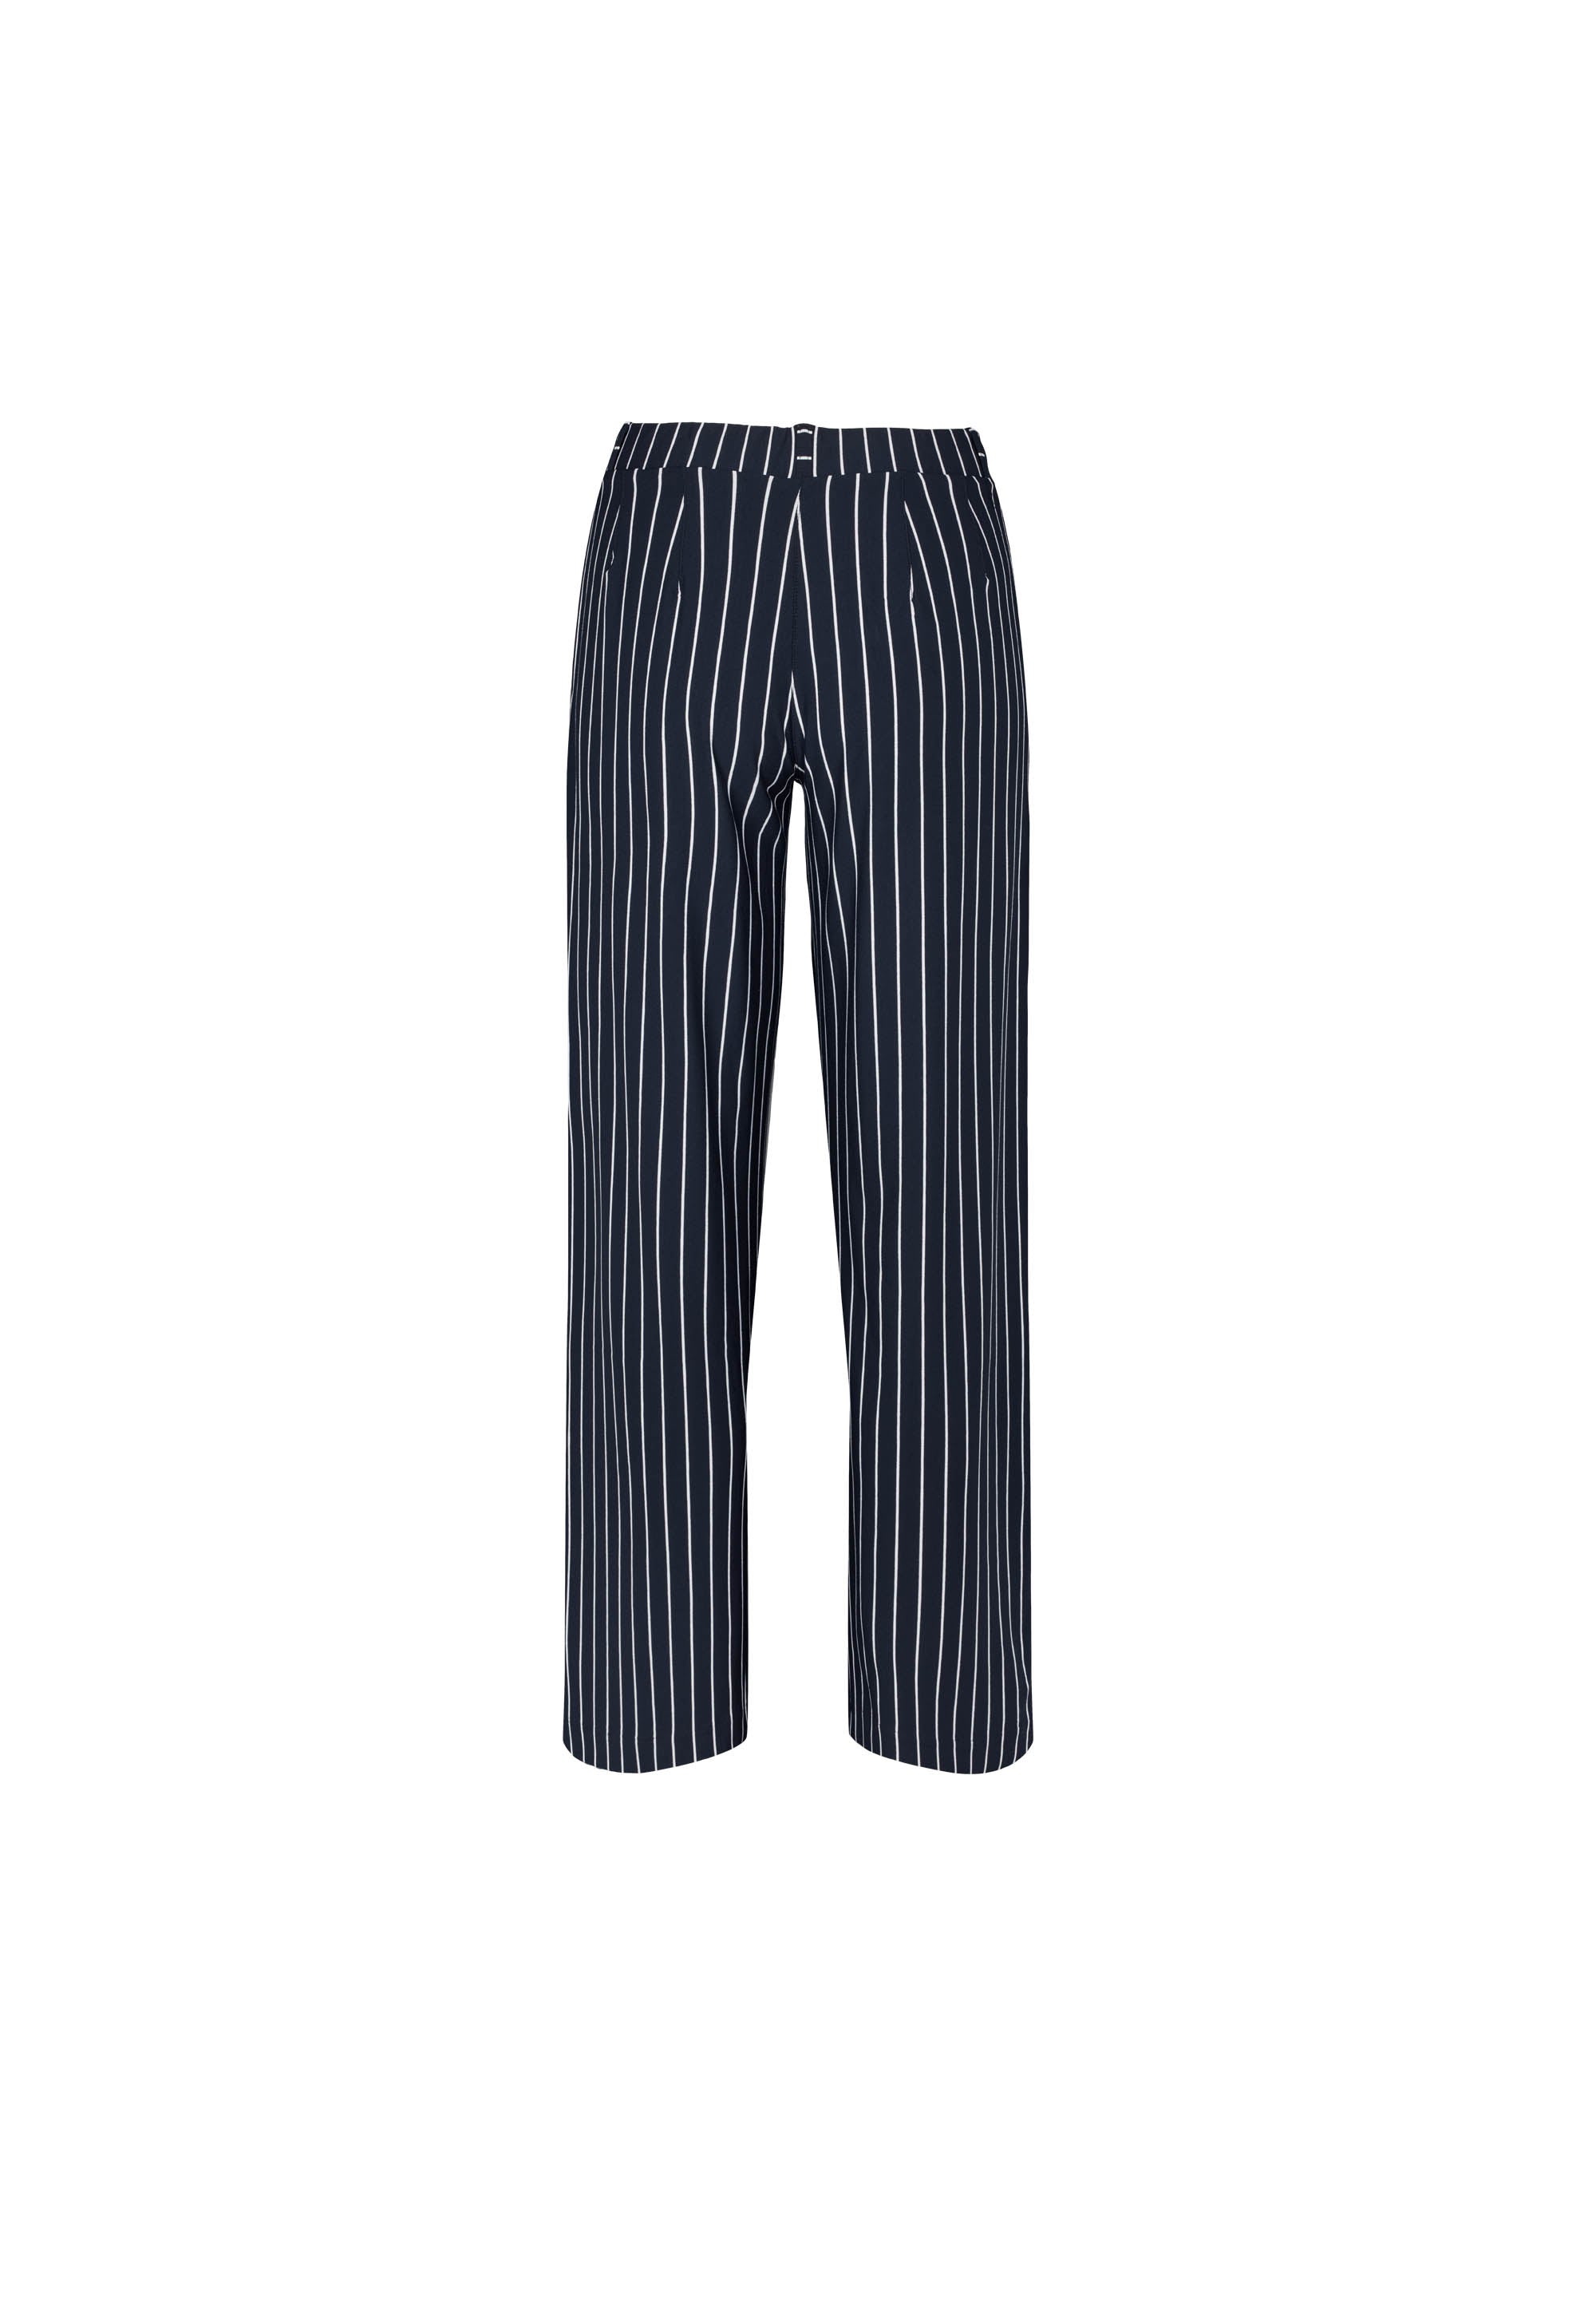 LAURIE Donna Loose Jersey - Short Length Trousers LOOSE 49222 Navy Stripe